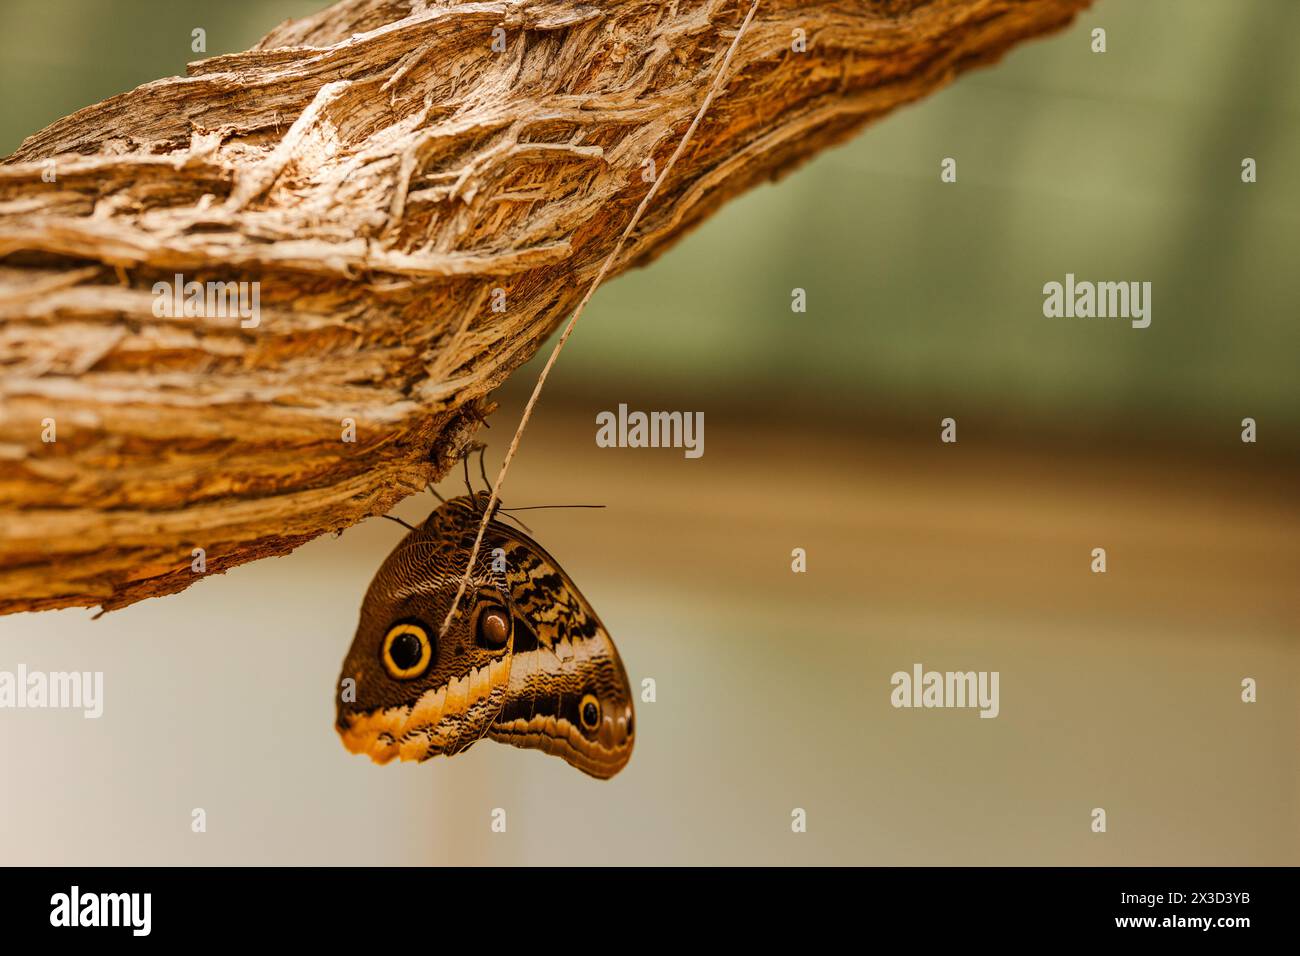 Owl butterfly mimics woodland textures on branch Stock Photo